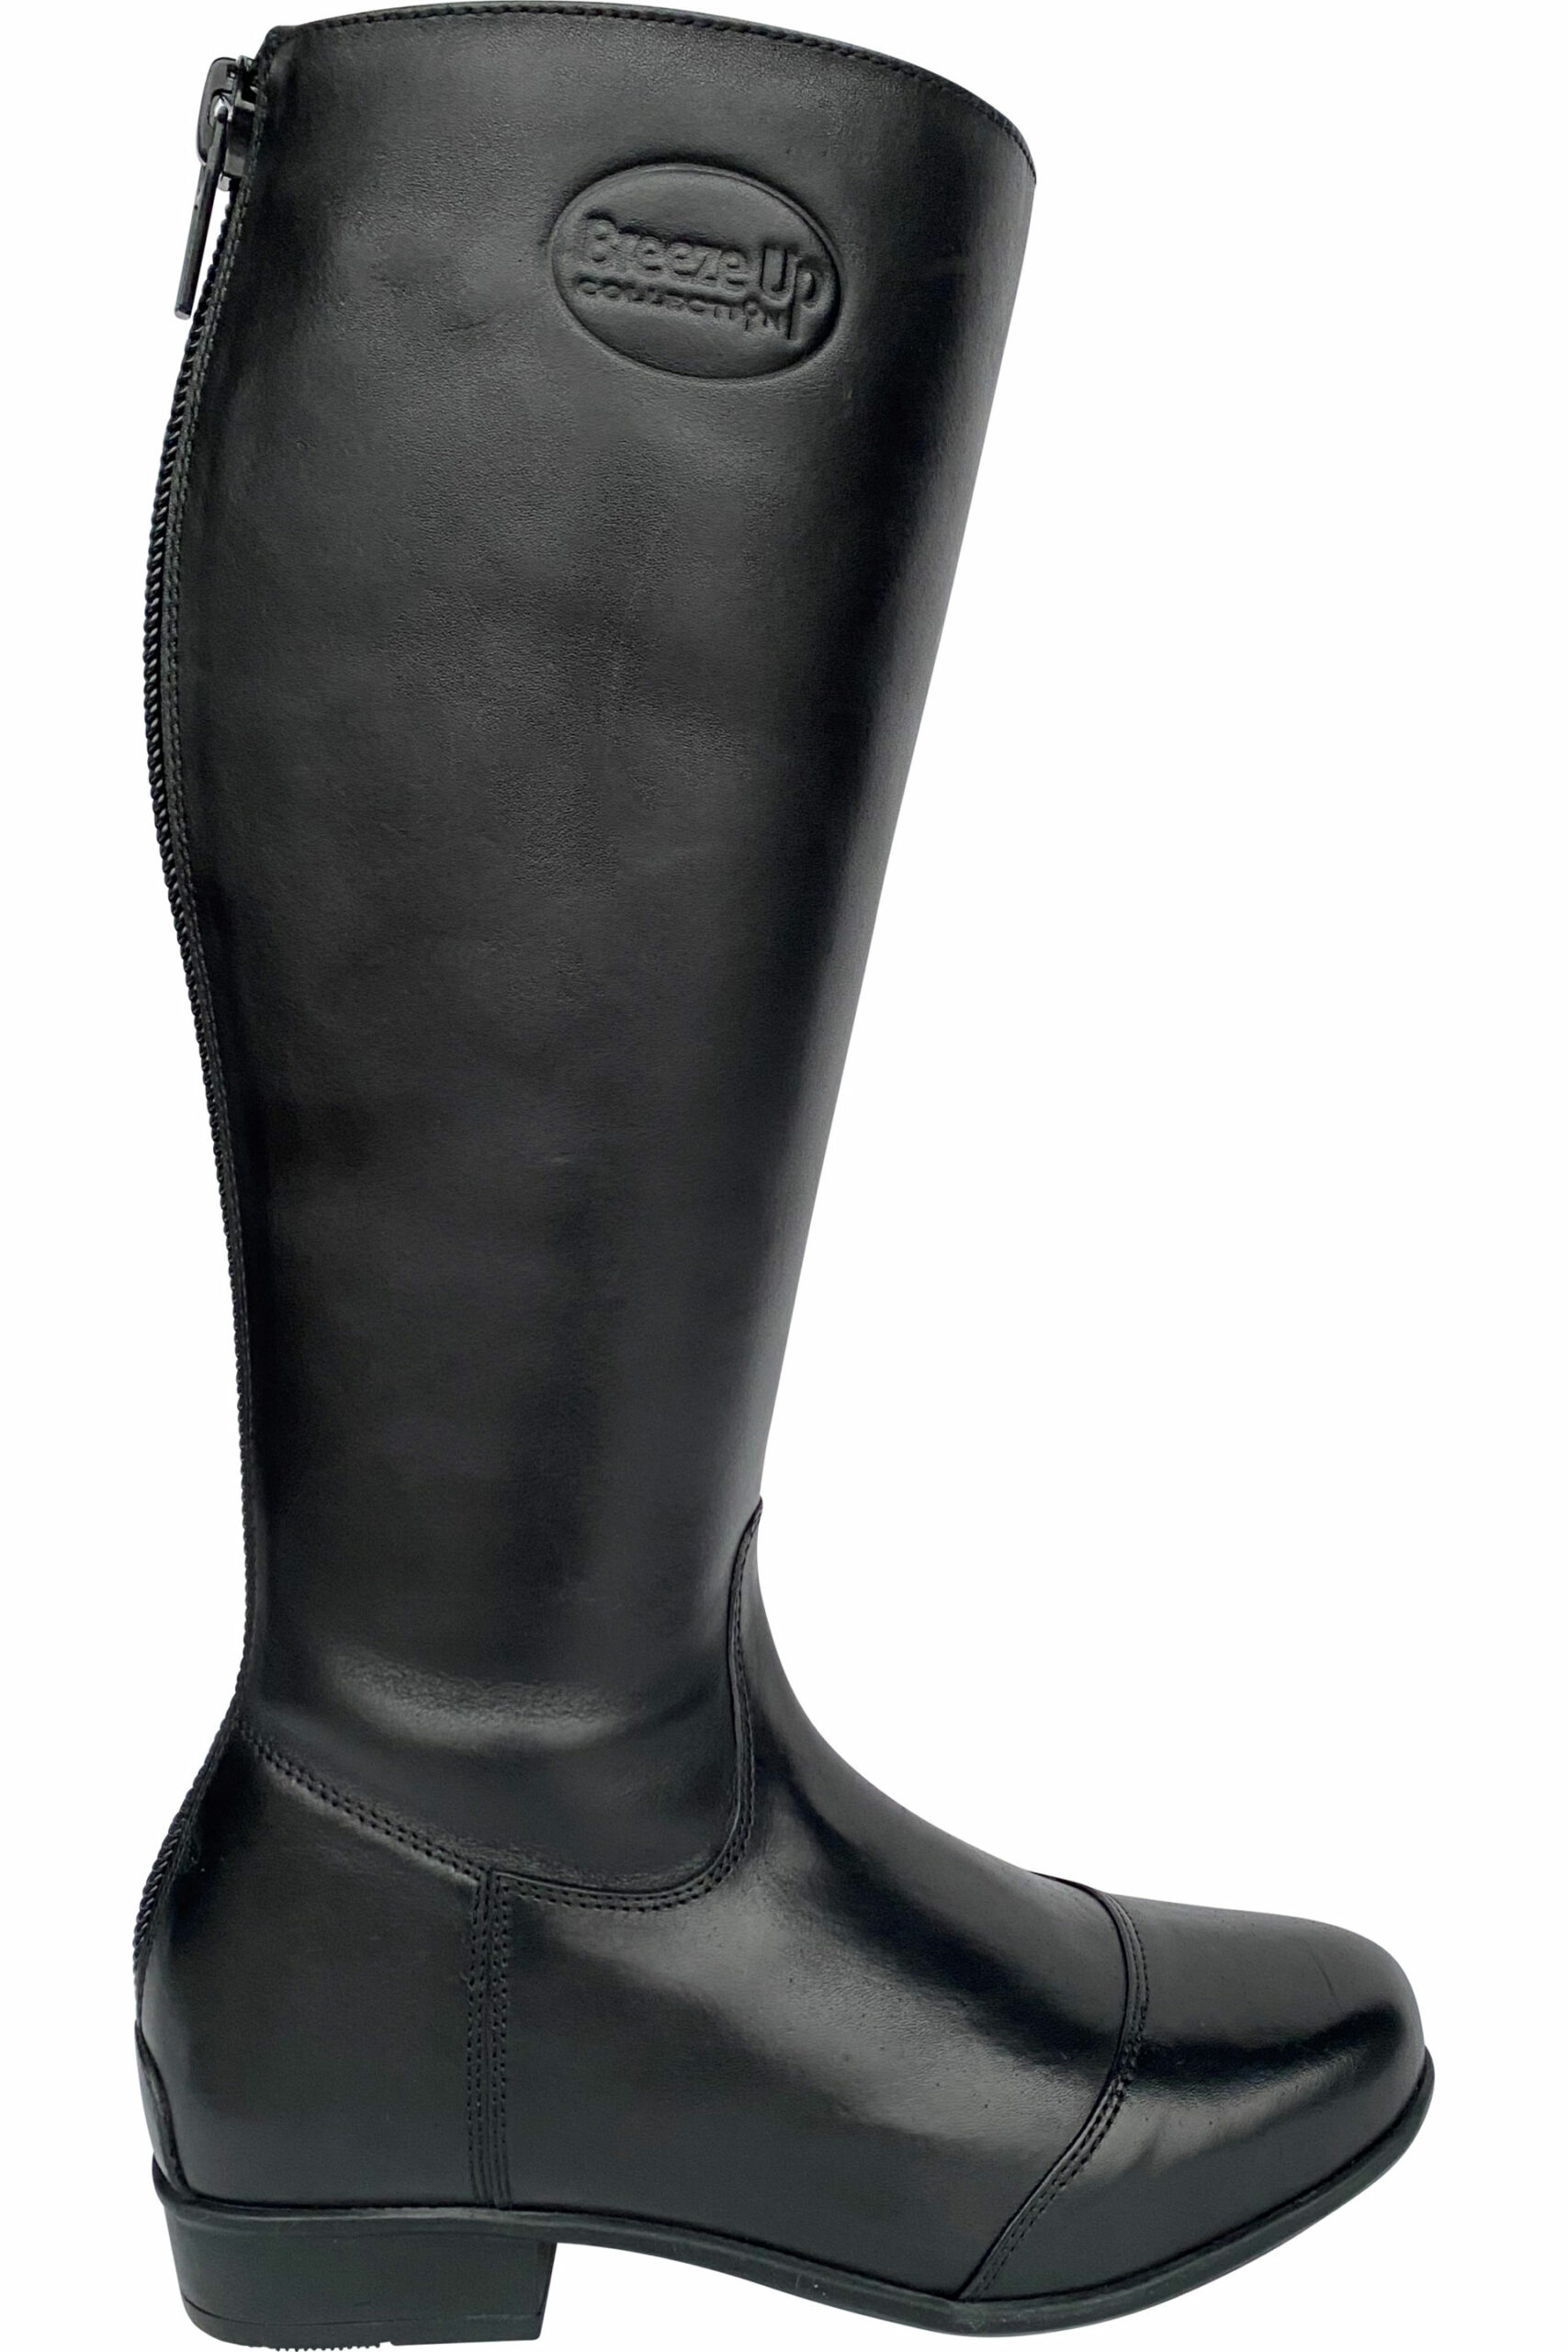 ECLIPSE” Leather Exercise Boot – Breeze up Collection